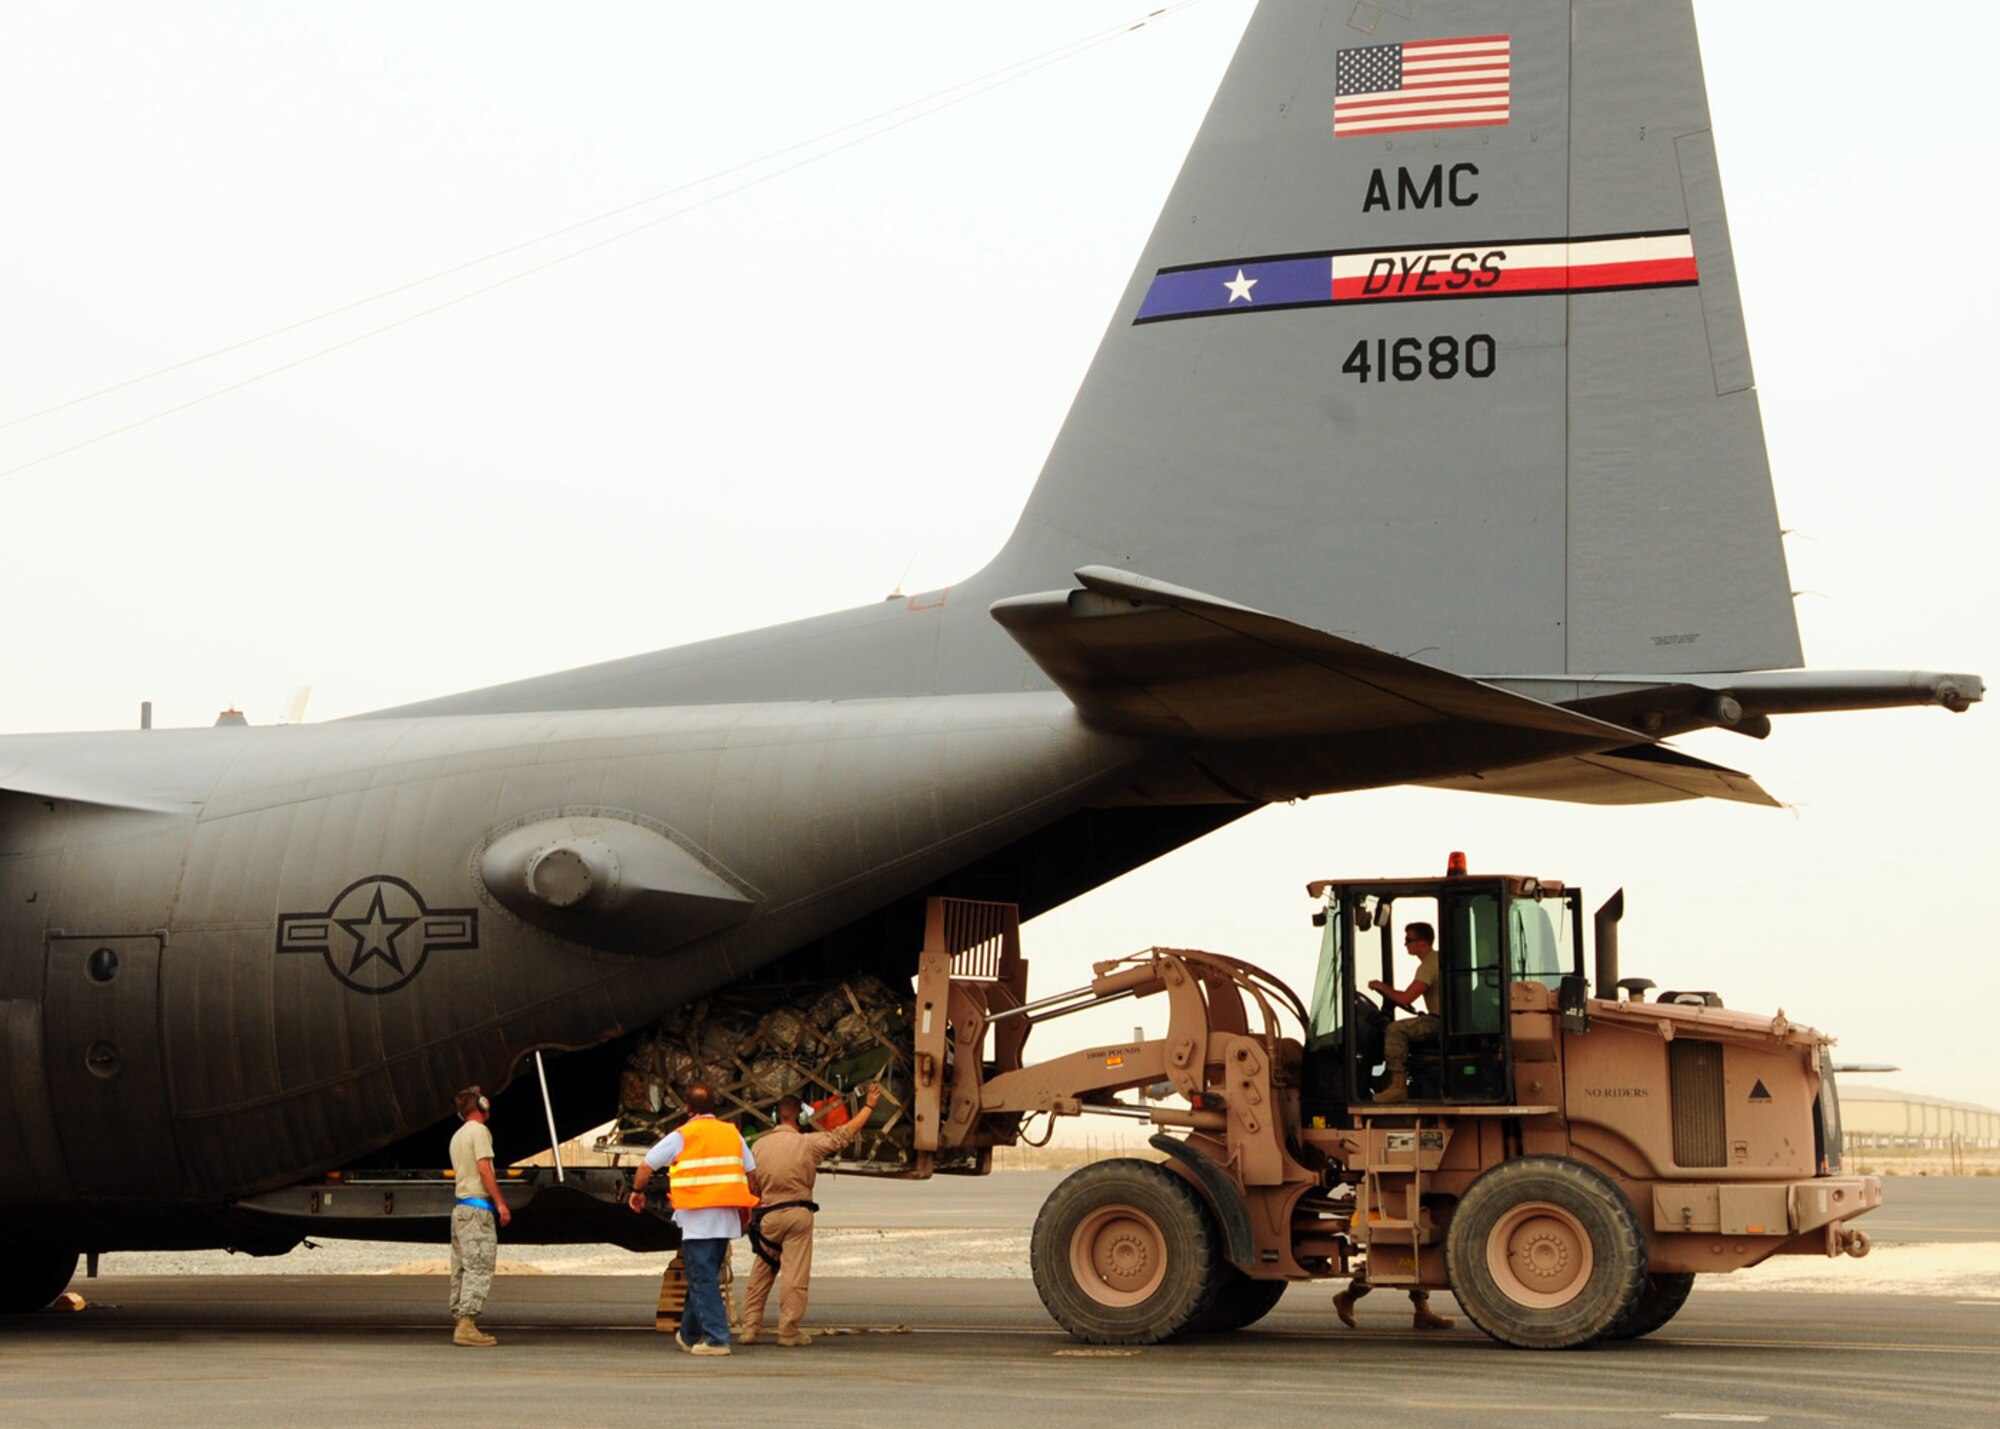 SOUTHWEST ASIA -- Airmen from the 386th Expeditionary Logistics Readiness Squadron unload cargo from a C-130 Hercules at an air base in Southwest Asia, May 6. At any given time an aircraft can carry personnel and supplies at the same time to bases throughout the area of responsibility. (U.S. Air Force photo/ Senior Airman Courtney Richardson)